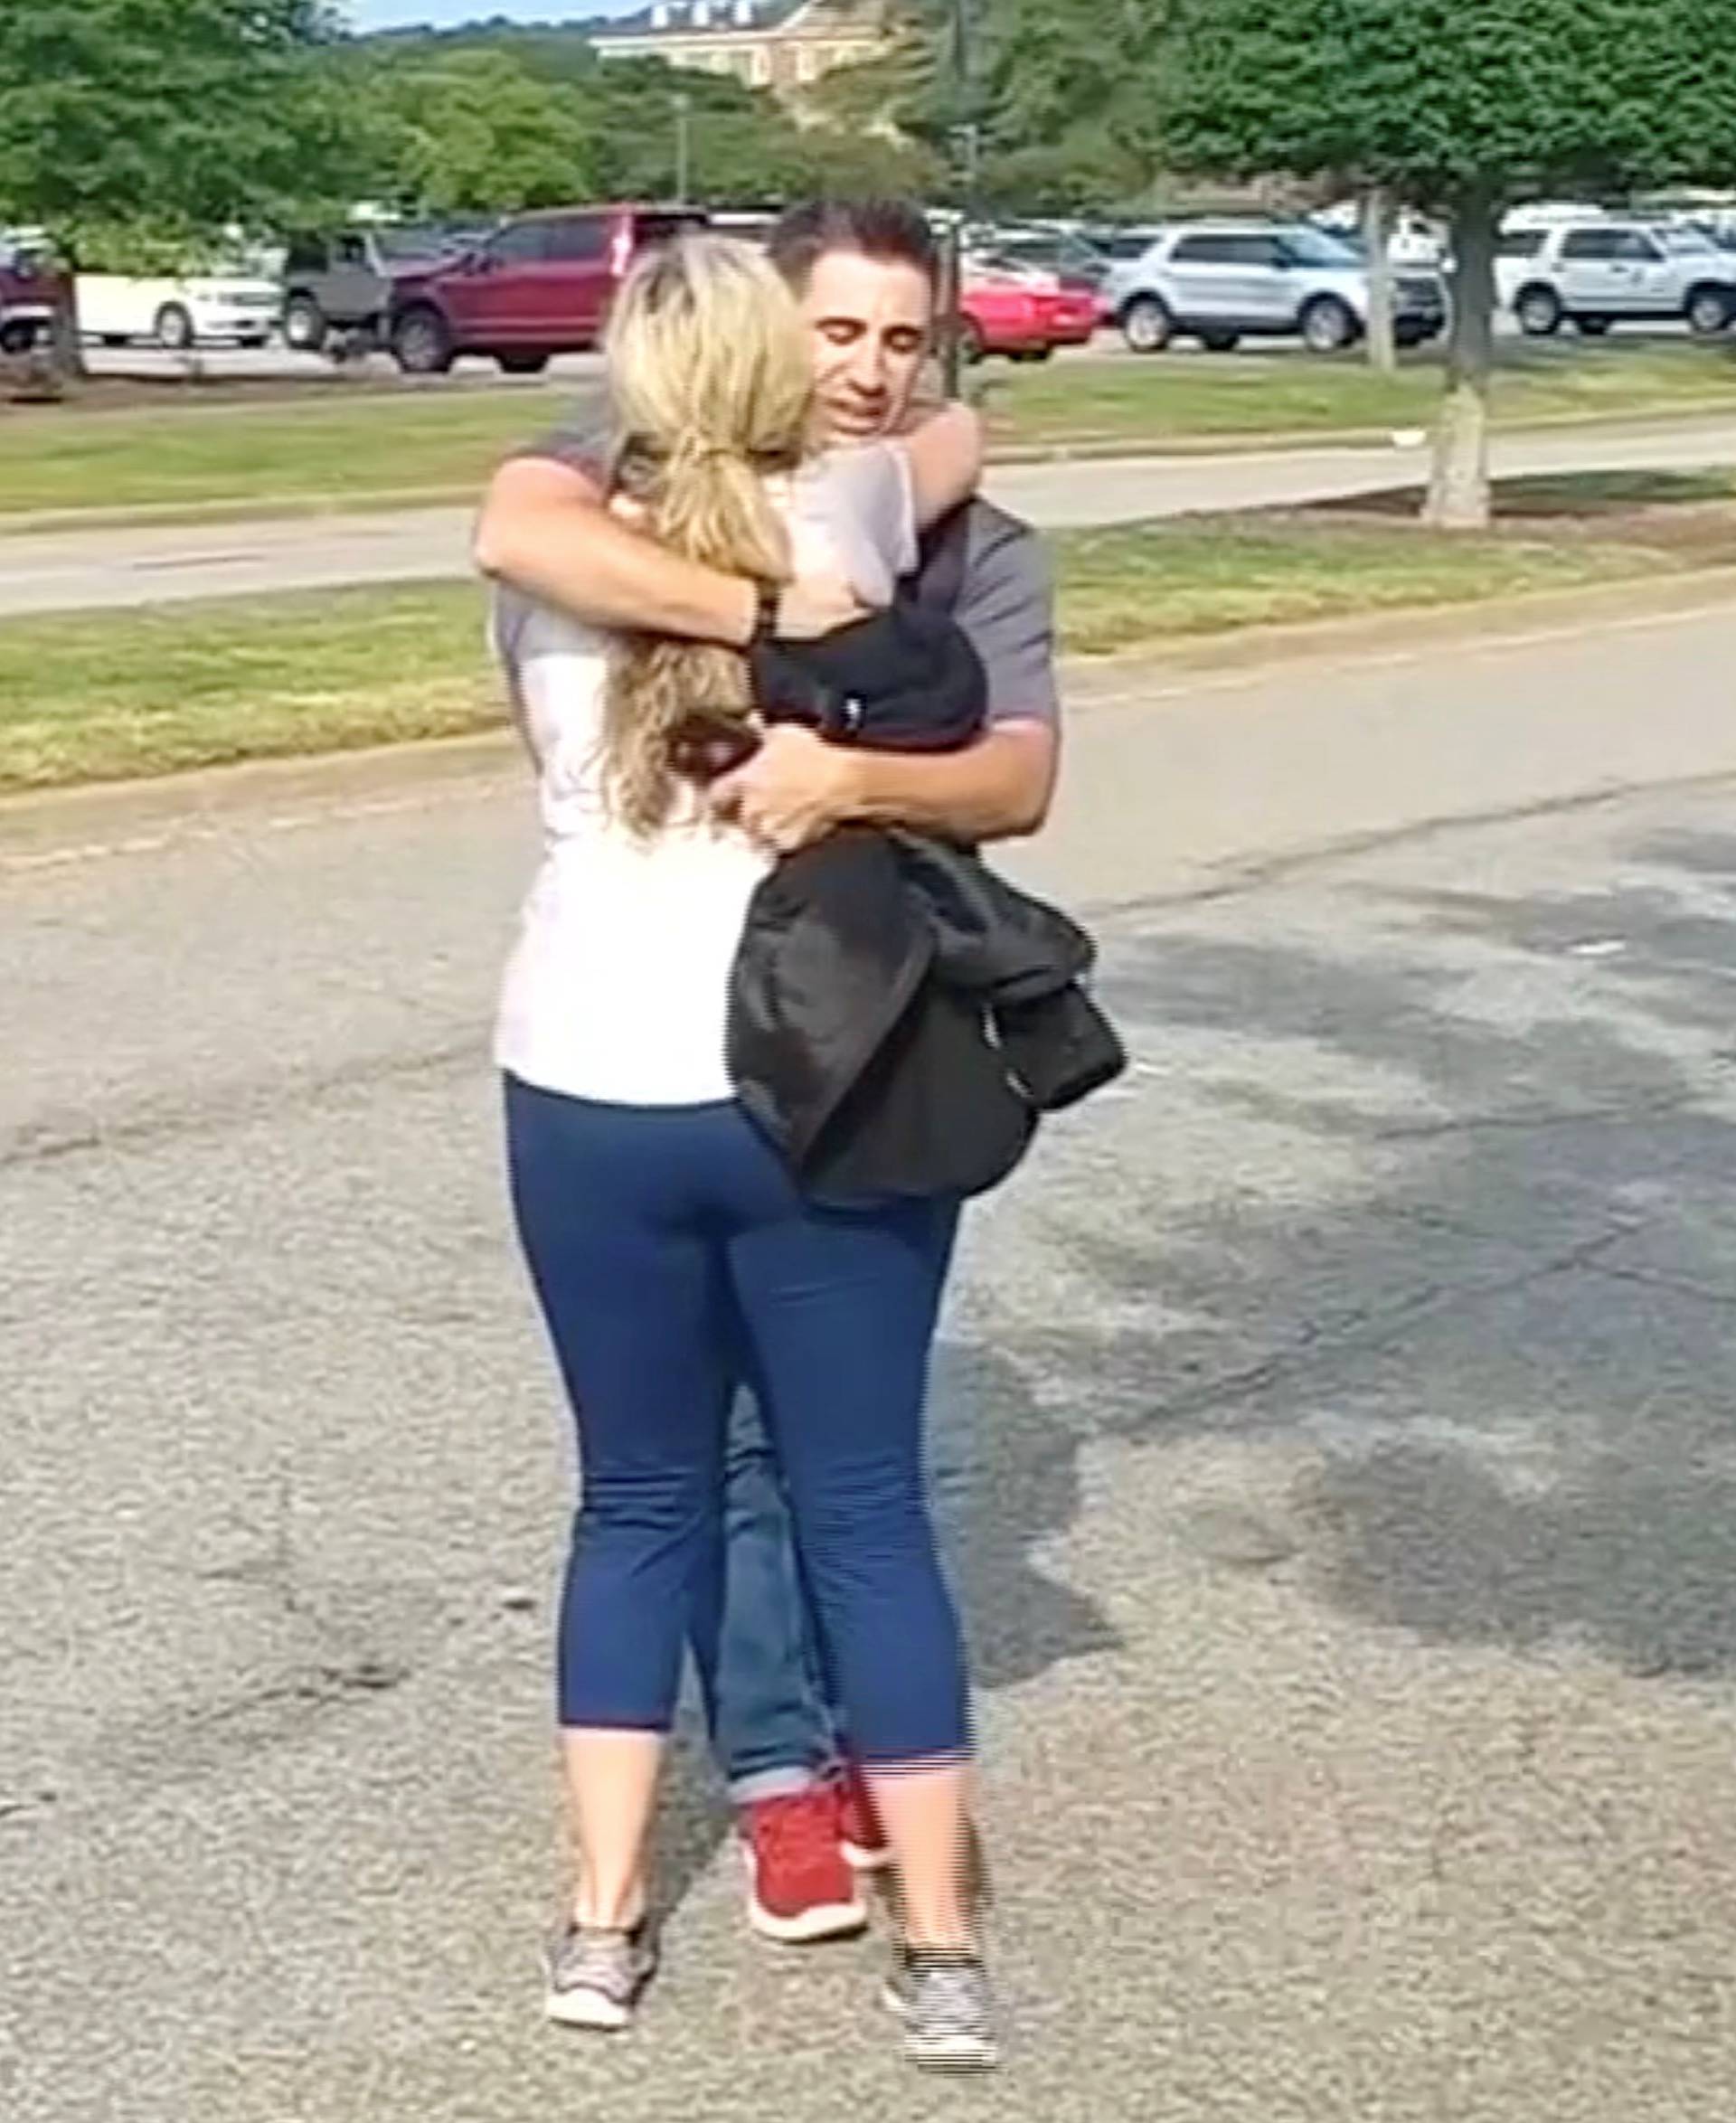 People embrace after being evacuated from a building by police in this still image taken from video following a shooting incident at the municipal center in Virginia Beach